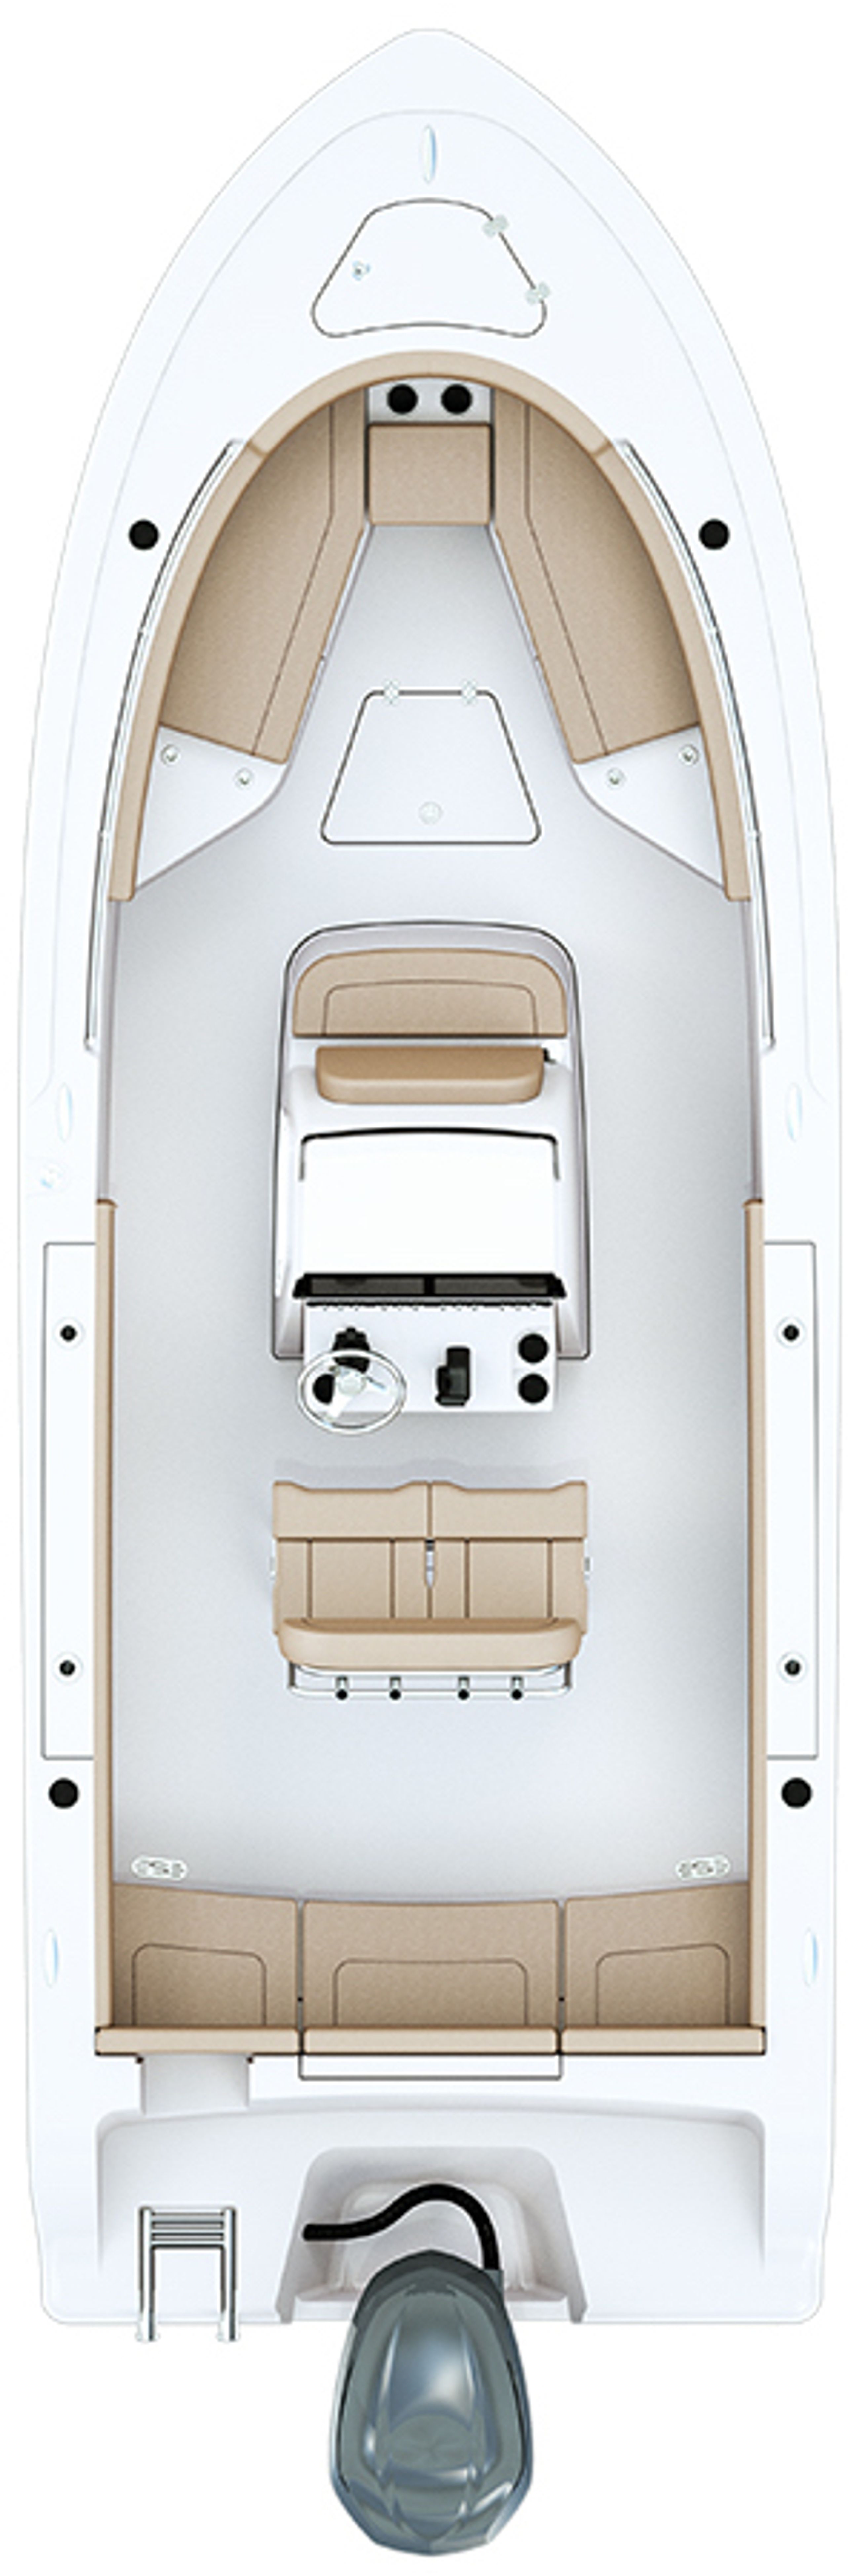 Overhead image of the 241-center-console